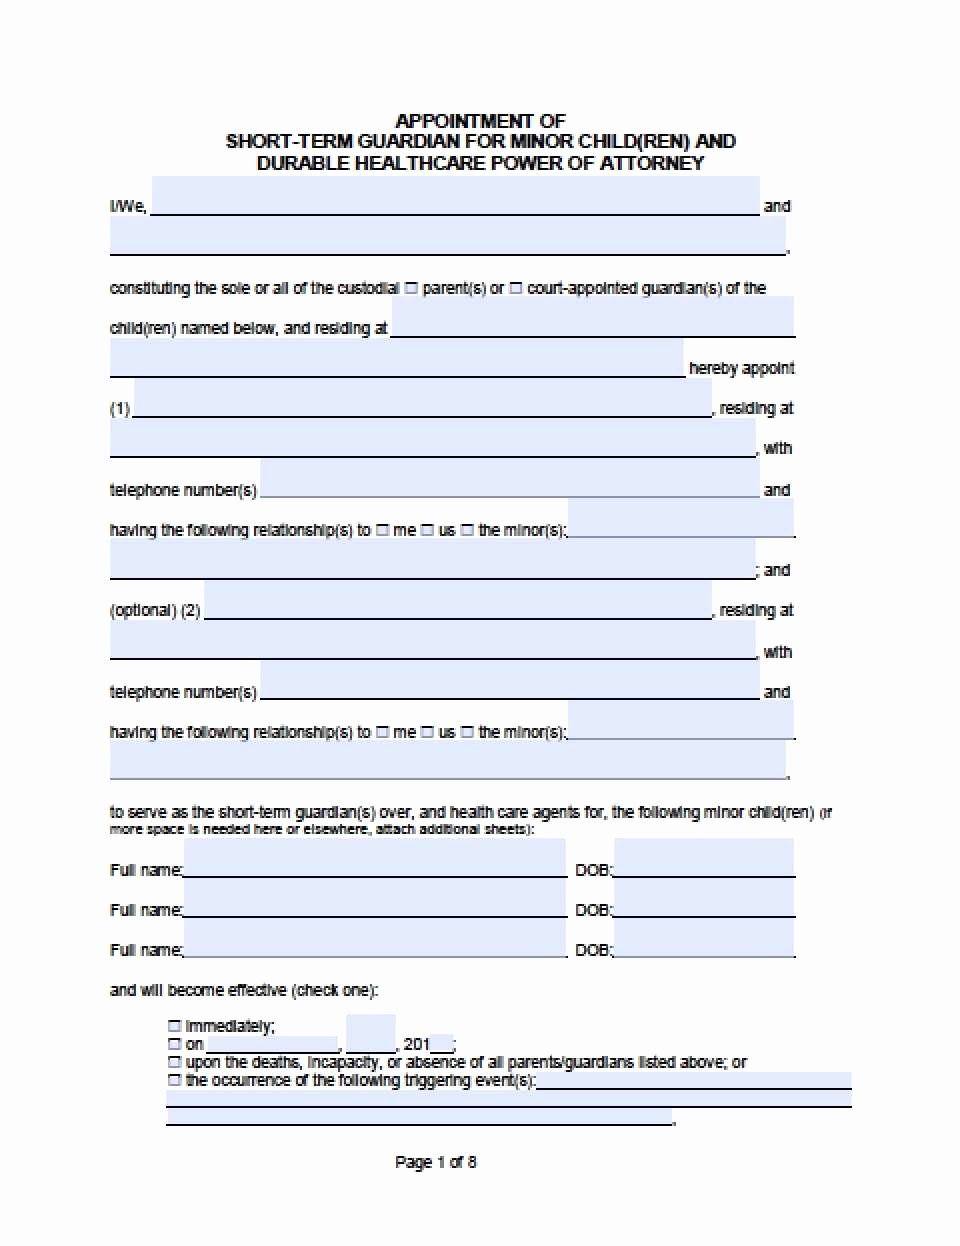 Free Temporary Guardianship form Luxury Temporary Guardianship Agreement form California Excellent